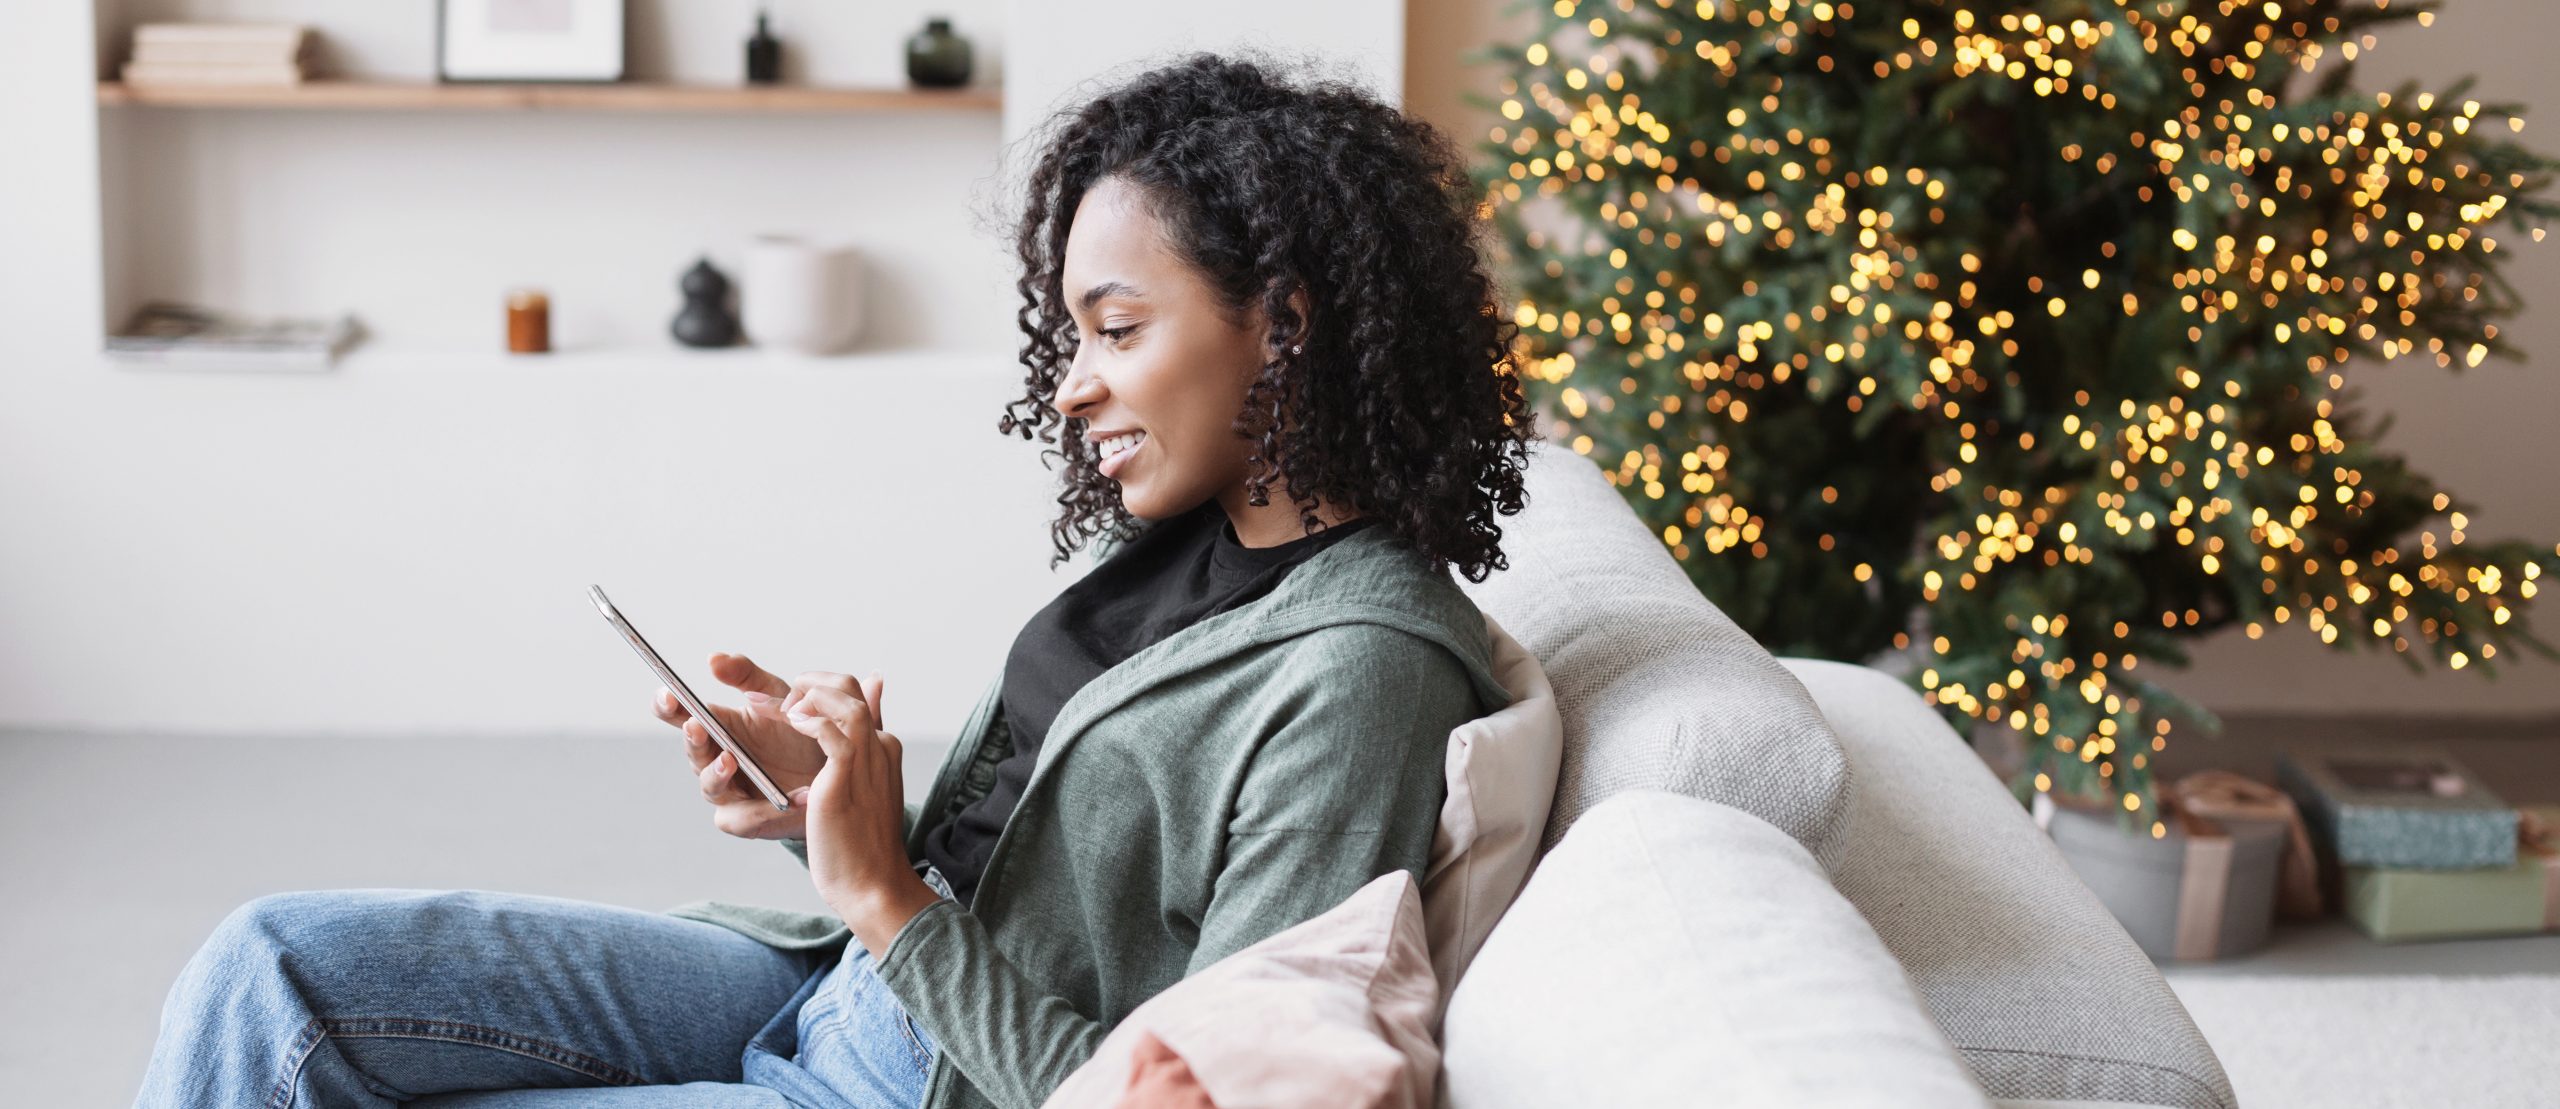 young black woman texting on couch at christmas